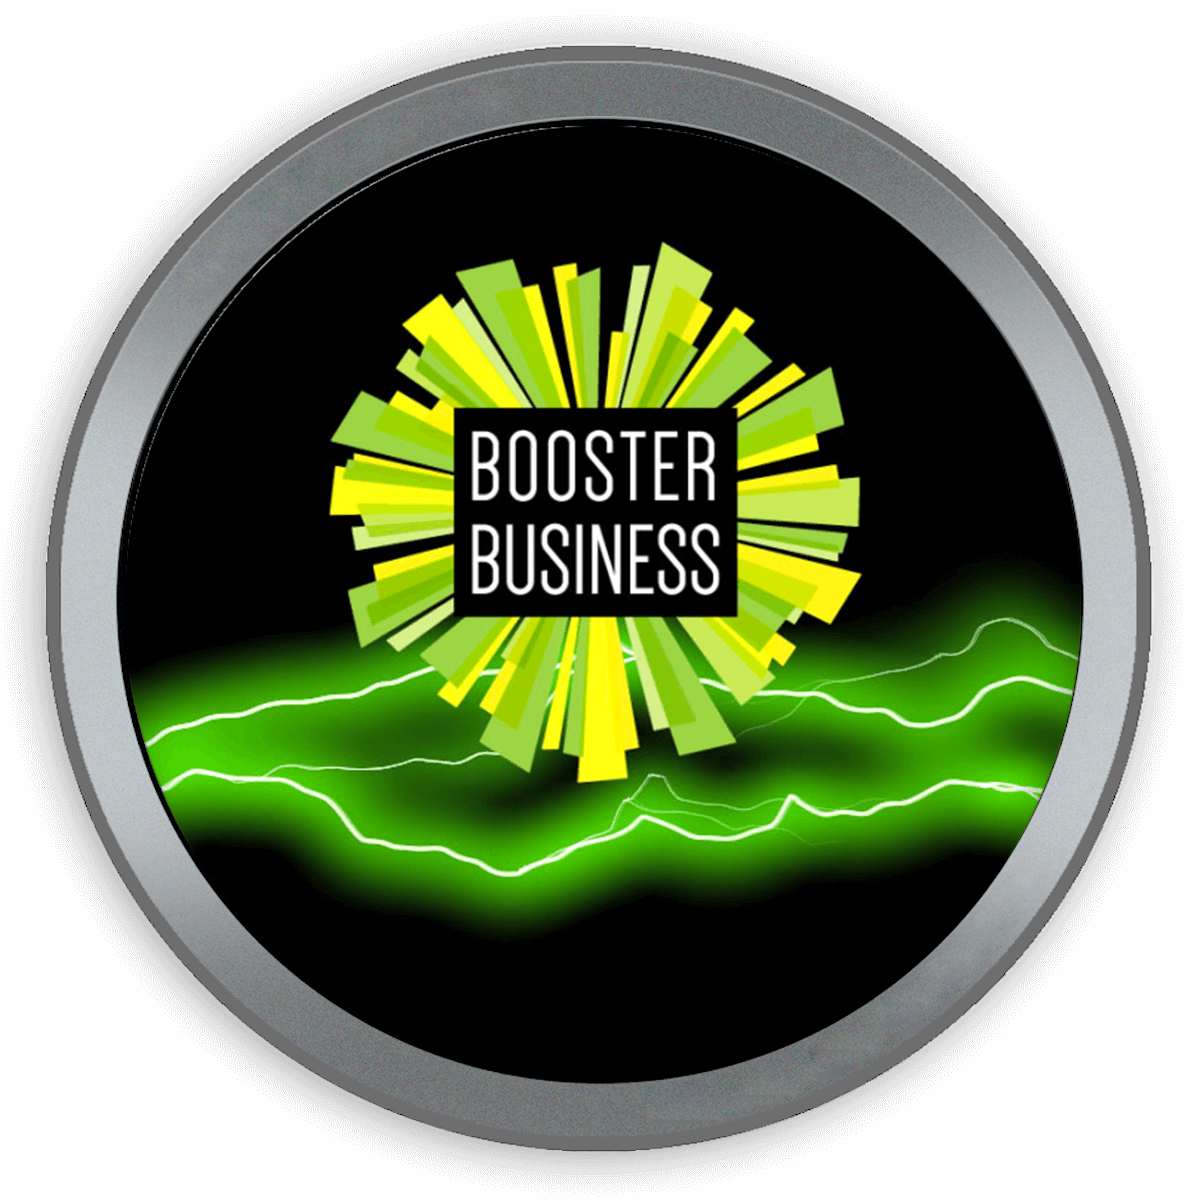 VIDEO booster business